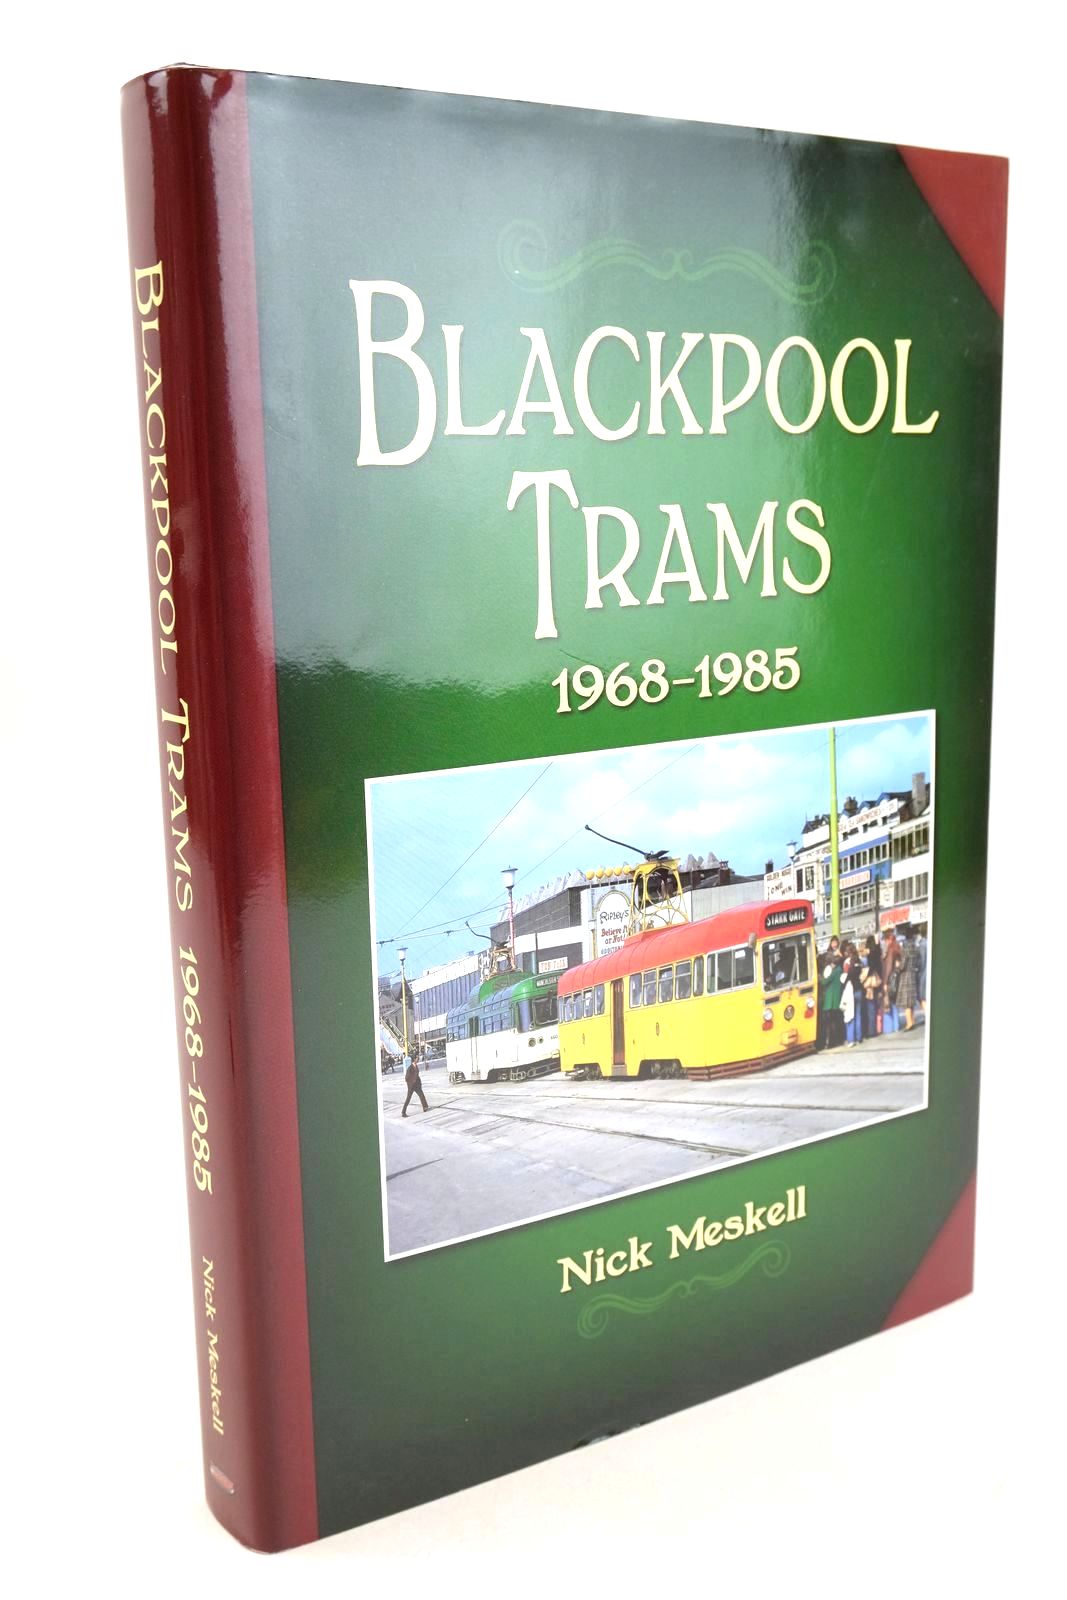 Photo of BLACKPOOL TRAMS 1968-1985 written by Meskell, Nick published by Train Crazy Publishing (STOCK CODE: 1326984)  for sale by Stella & Rose's Books